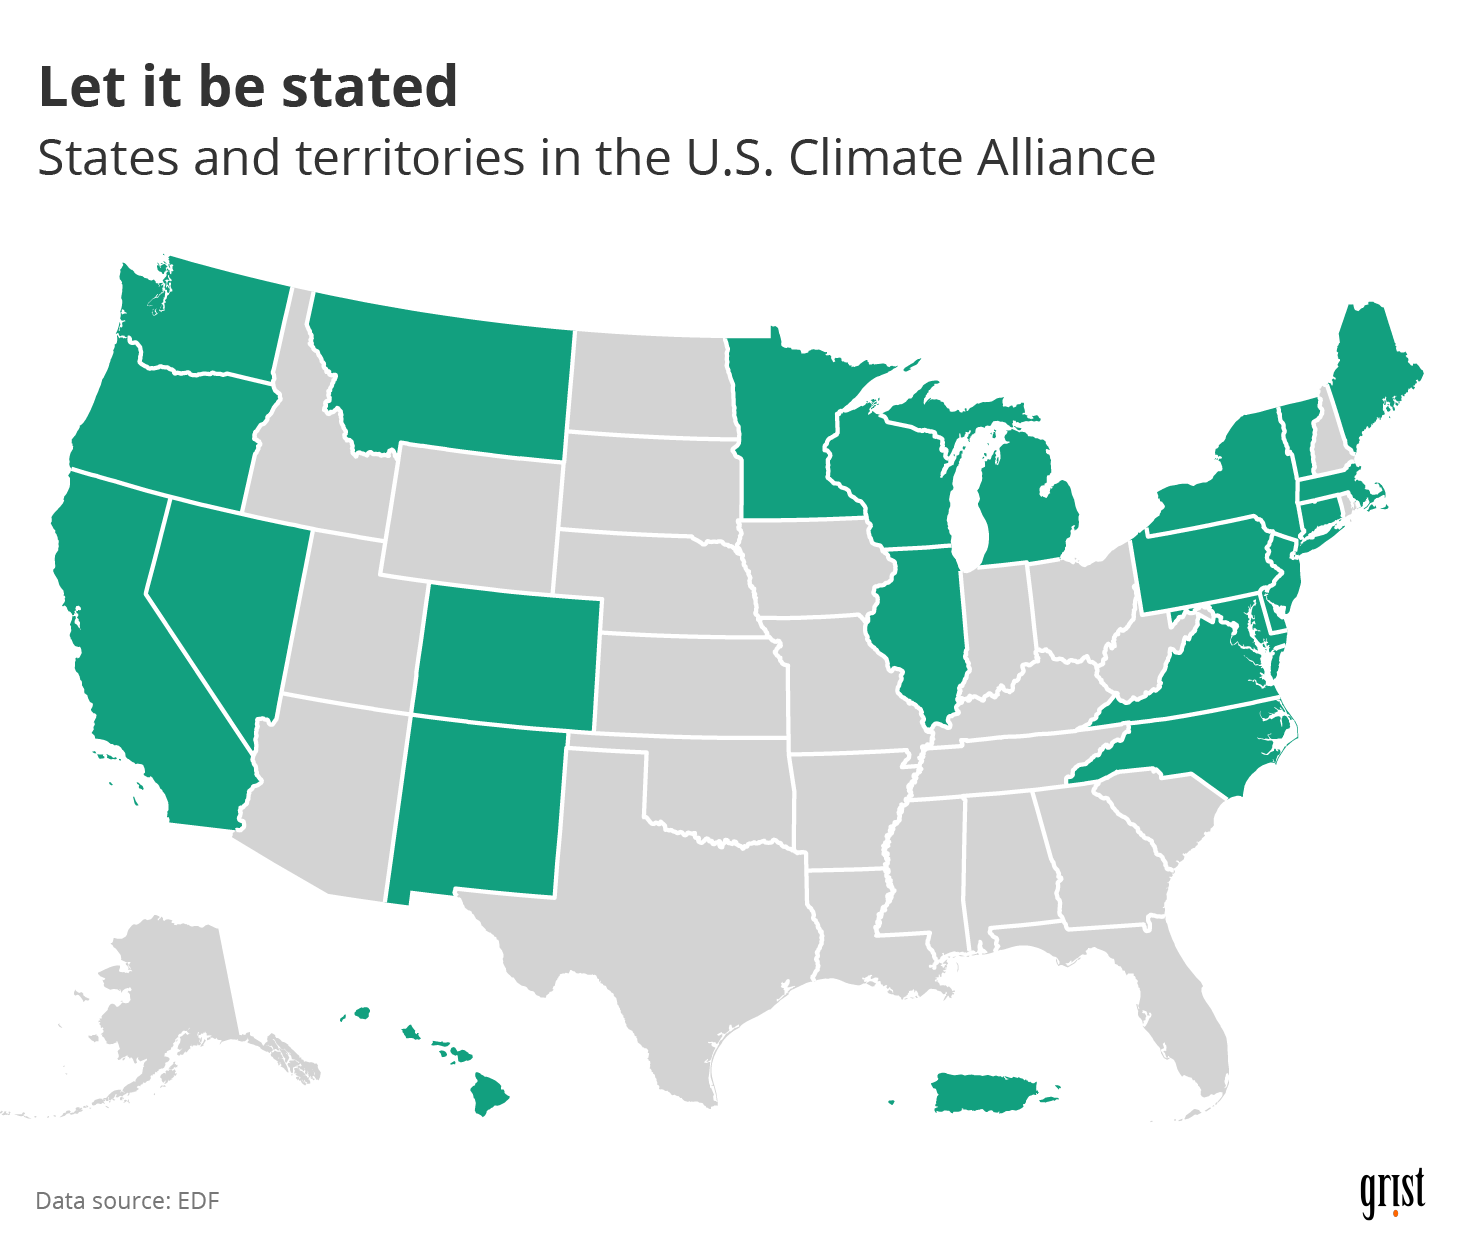 A map showing the states and territories in the U.S. Climate Alliance. Members include many states in the Northeast and on the West Coast, as well as Puerto Rico and Hawaii.